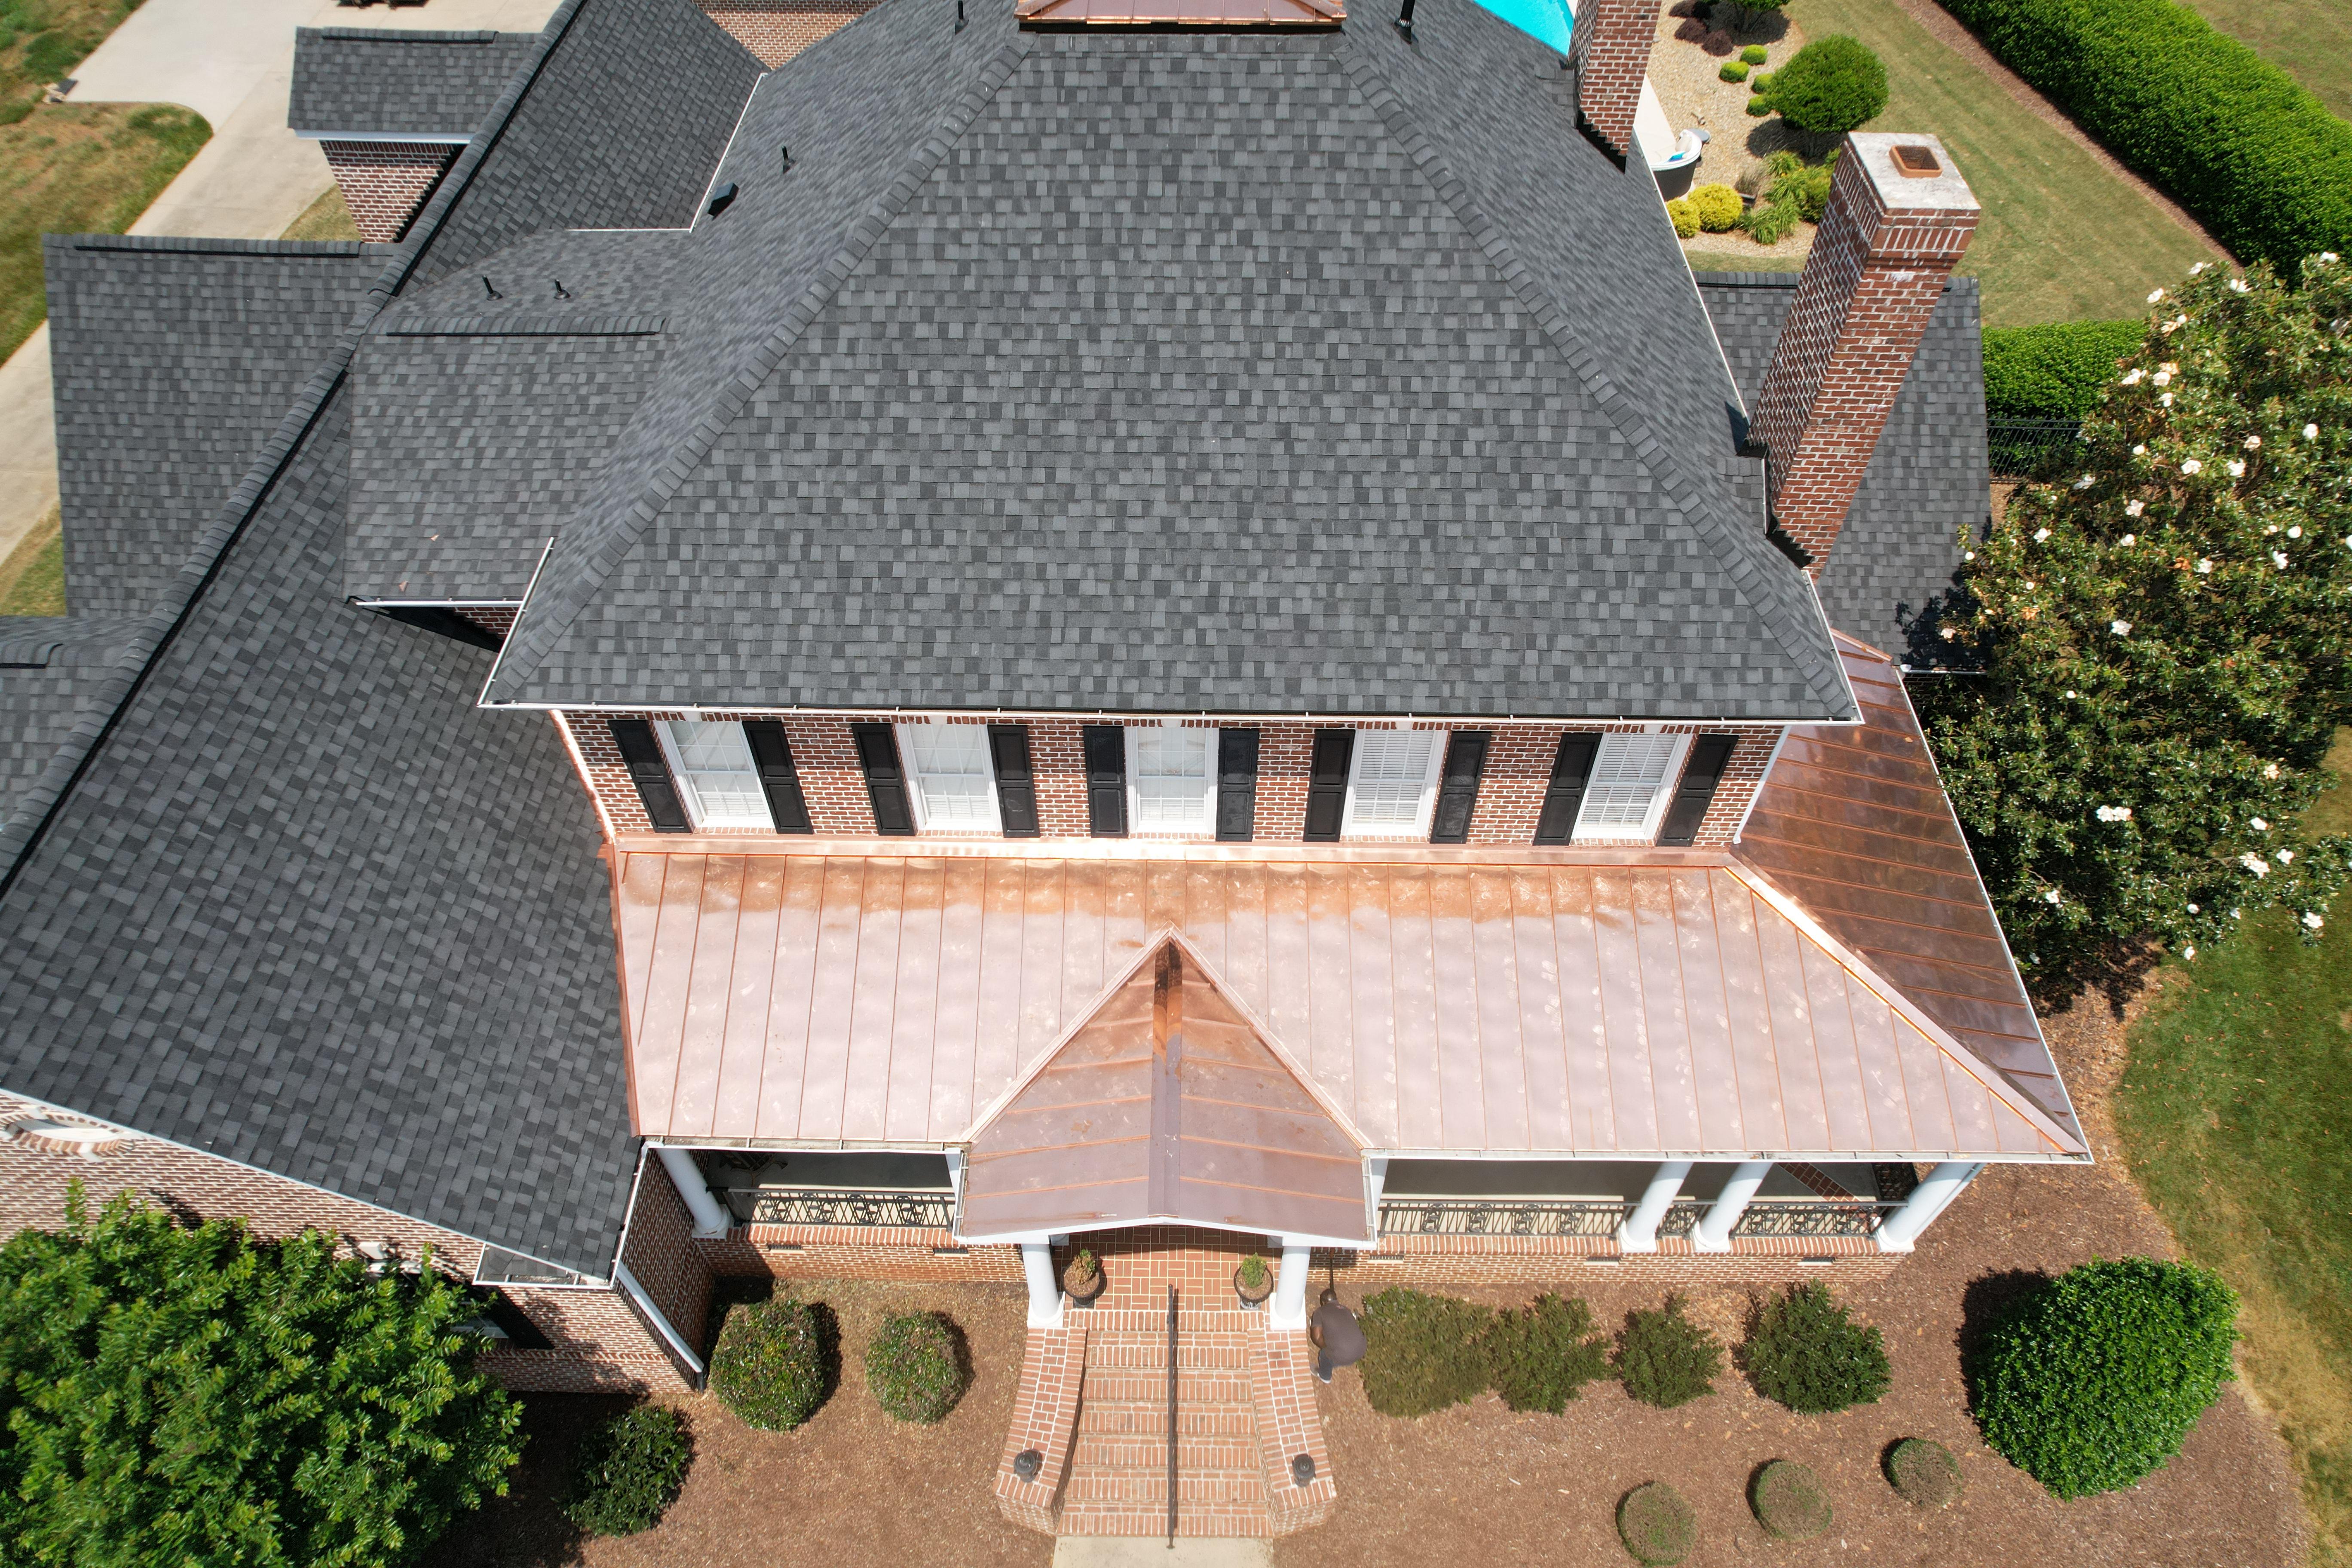 The Roofing Company of Greenville, SC